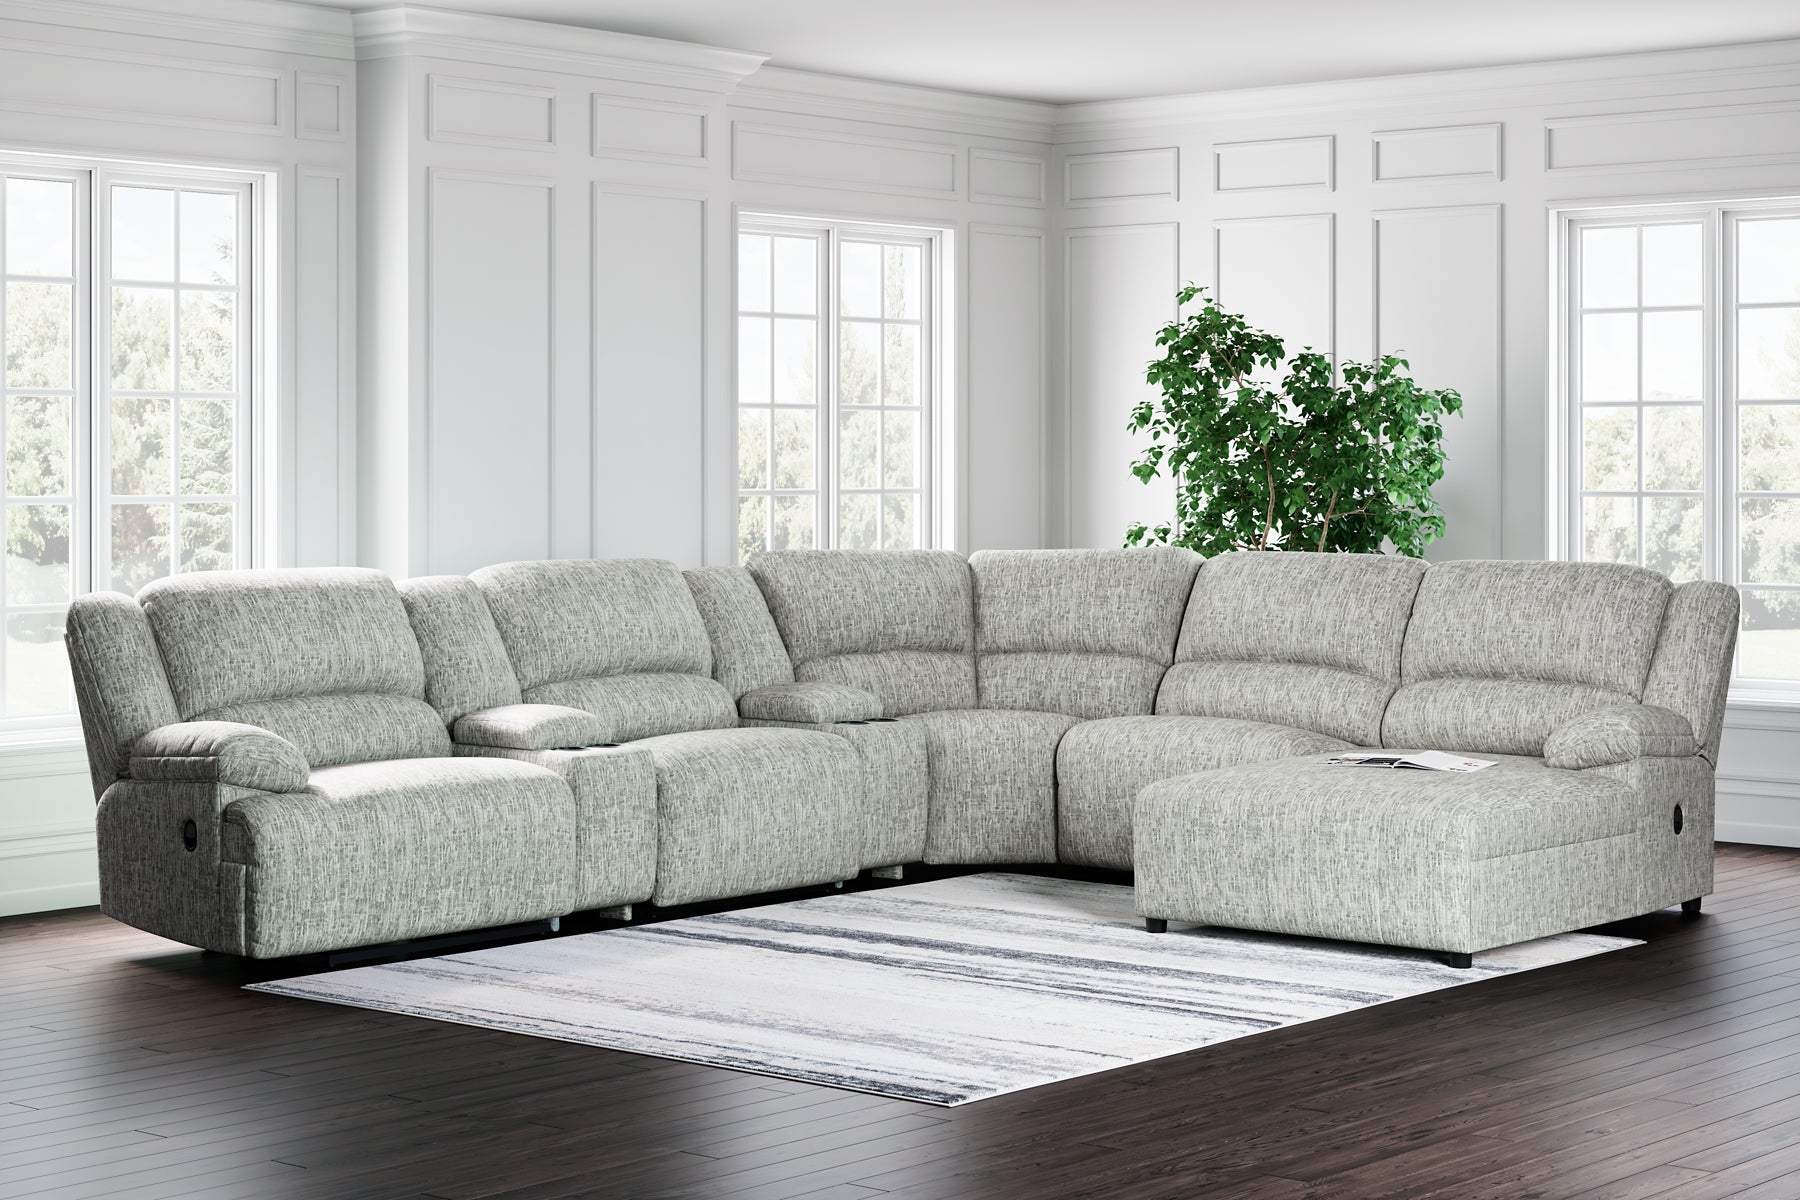 McClelland 7-Piece Reclining Sectional with Chaise Wilson Furniture (OH)  in Bridgeport, Ohio. Serving Bridgeport, Yorkville, Bellaire, & Avondale